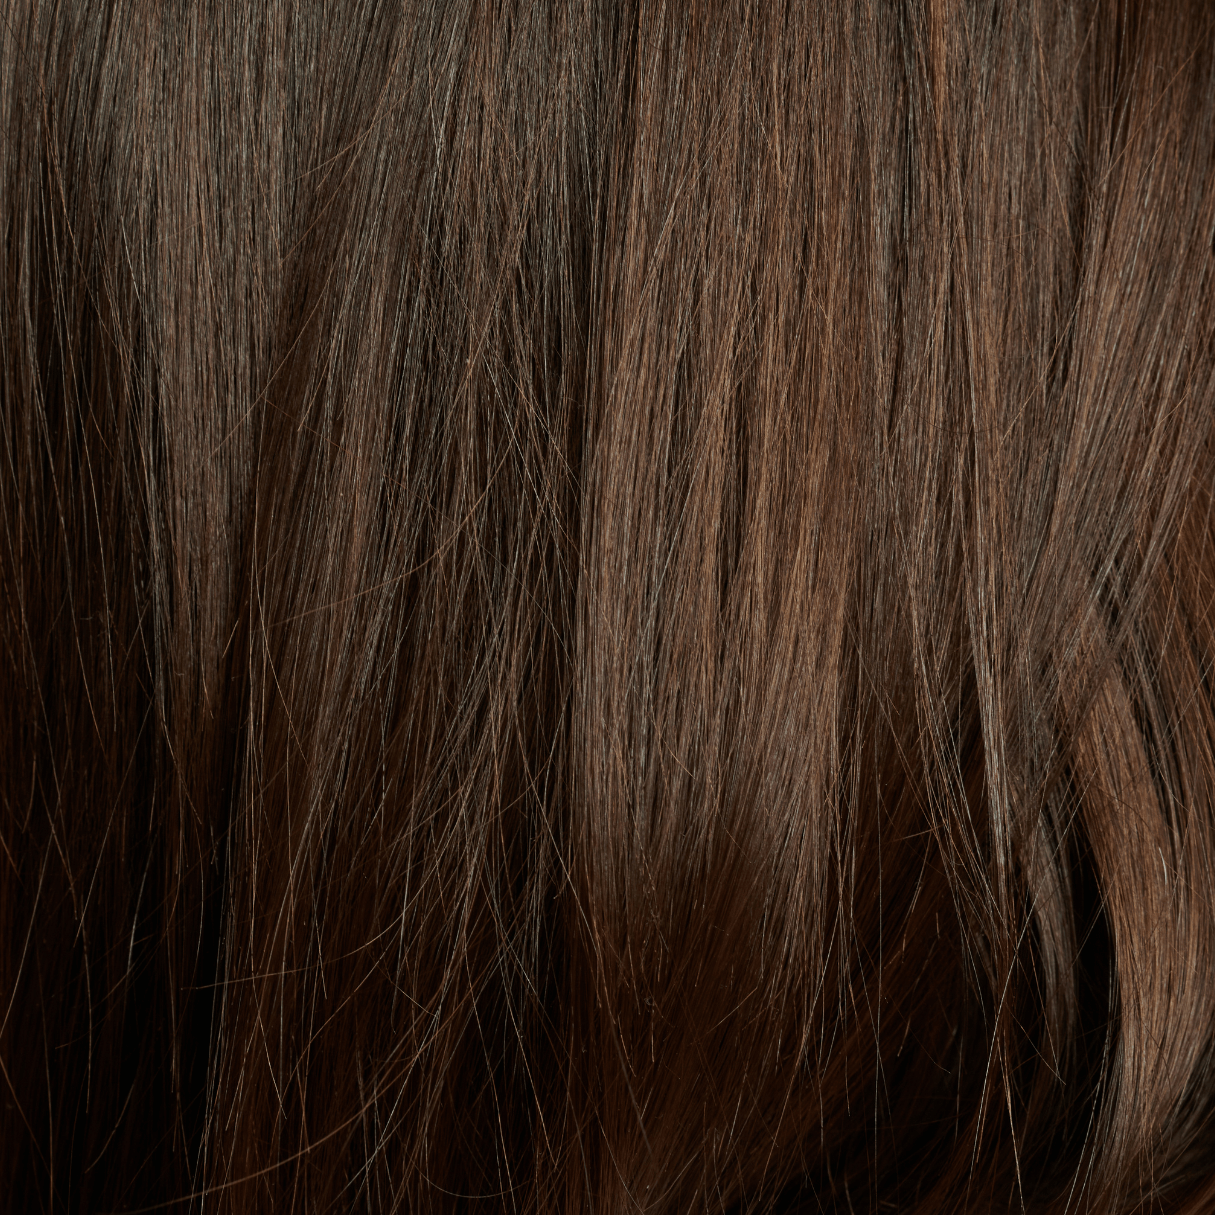 How to care for straight hair, best products for straight hair